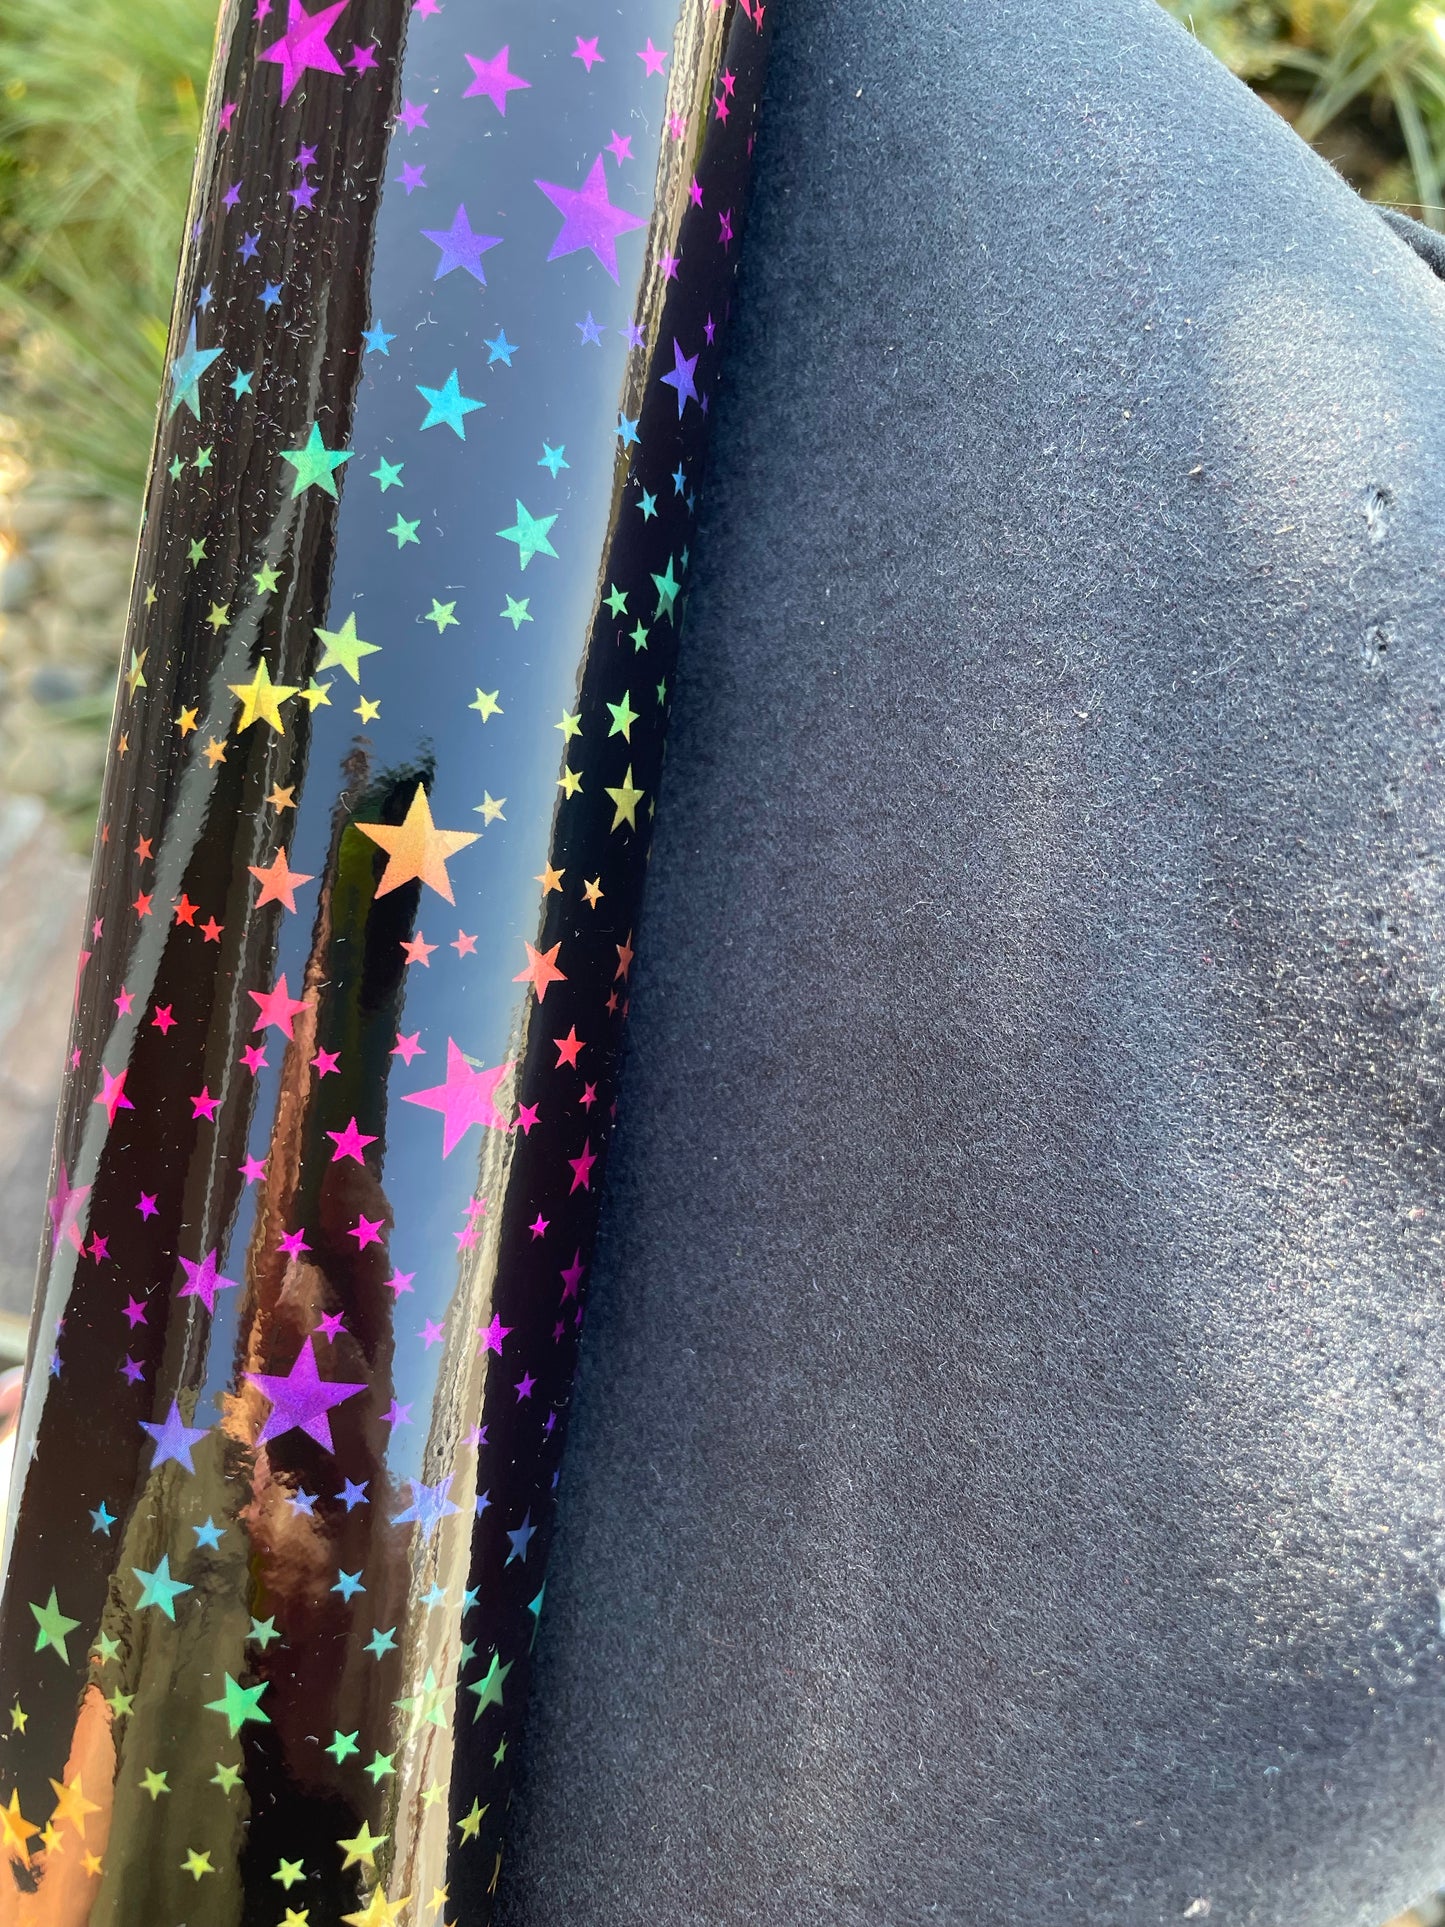 Bright Rainbow Holographic Star Patent Vinyl (faux leather)